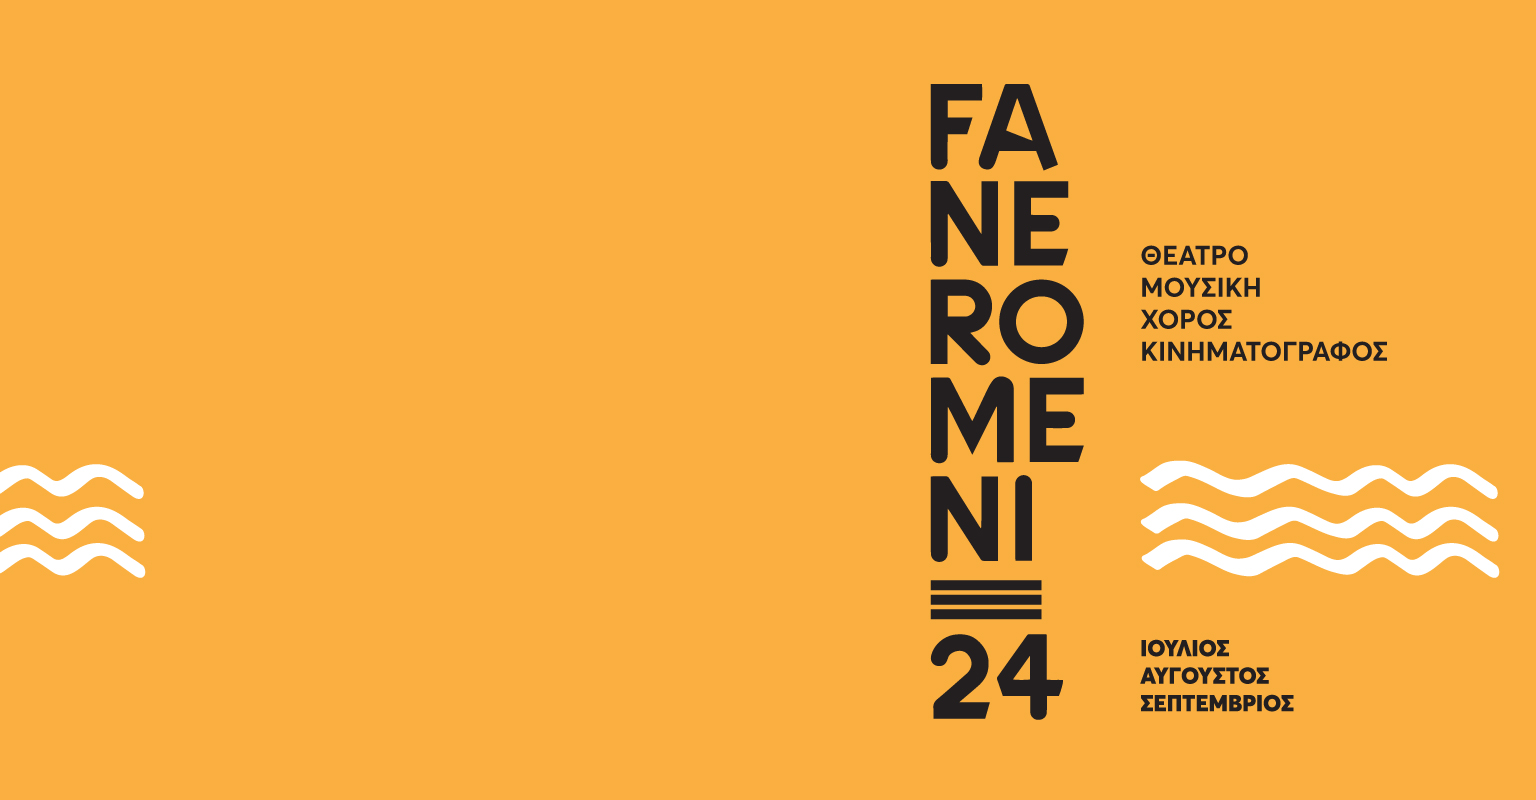 The Bank of Cyprus Cultural Foundation hosts the FANEROMENI24 Arts Festival